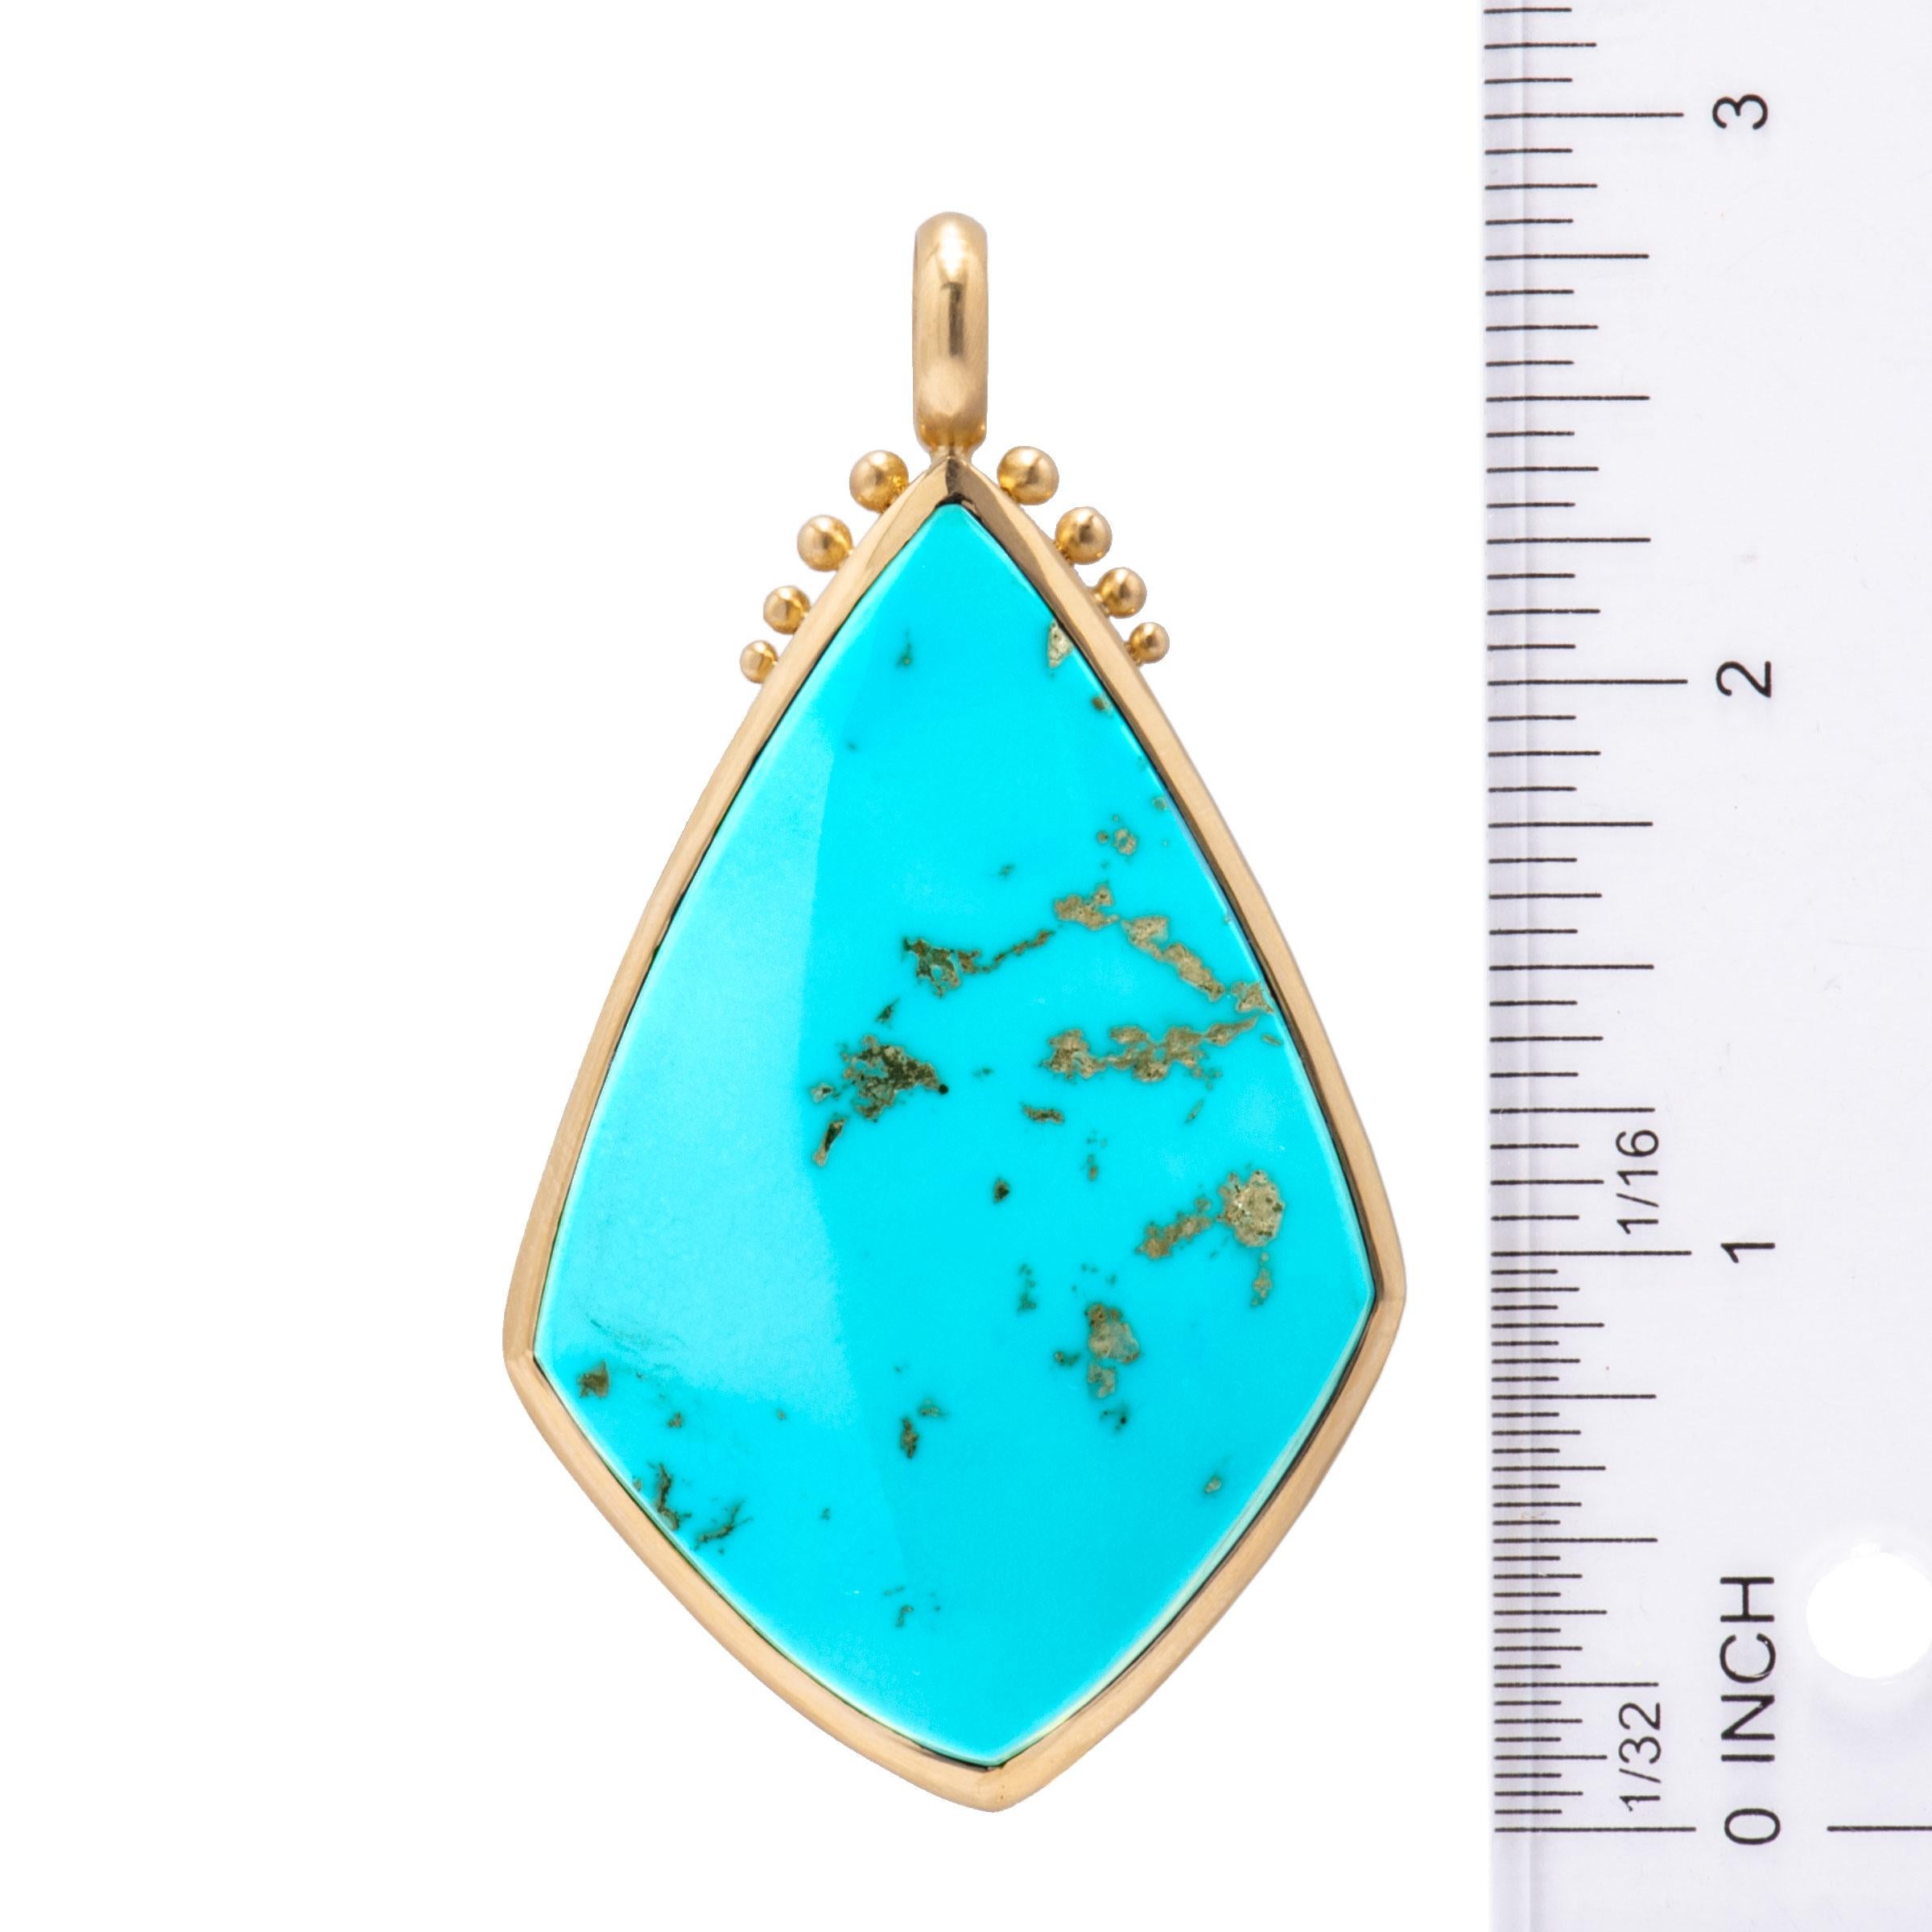 Sleeping Beauty Turquoise Pendant In New Condition For Sale In Santa Fe, NM